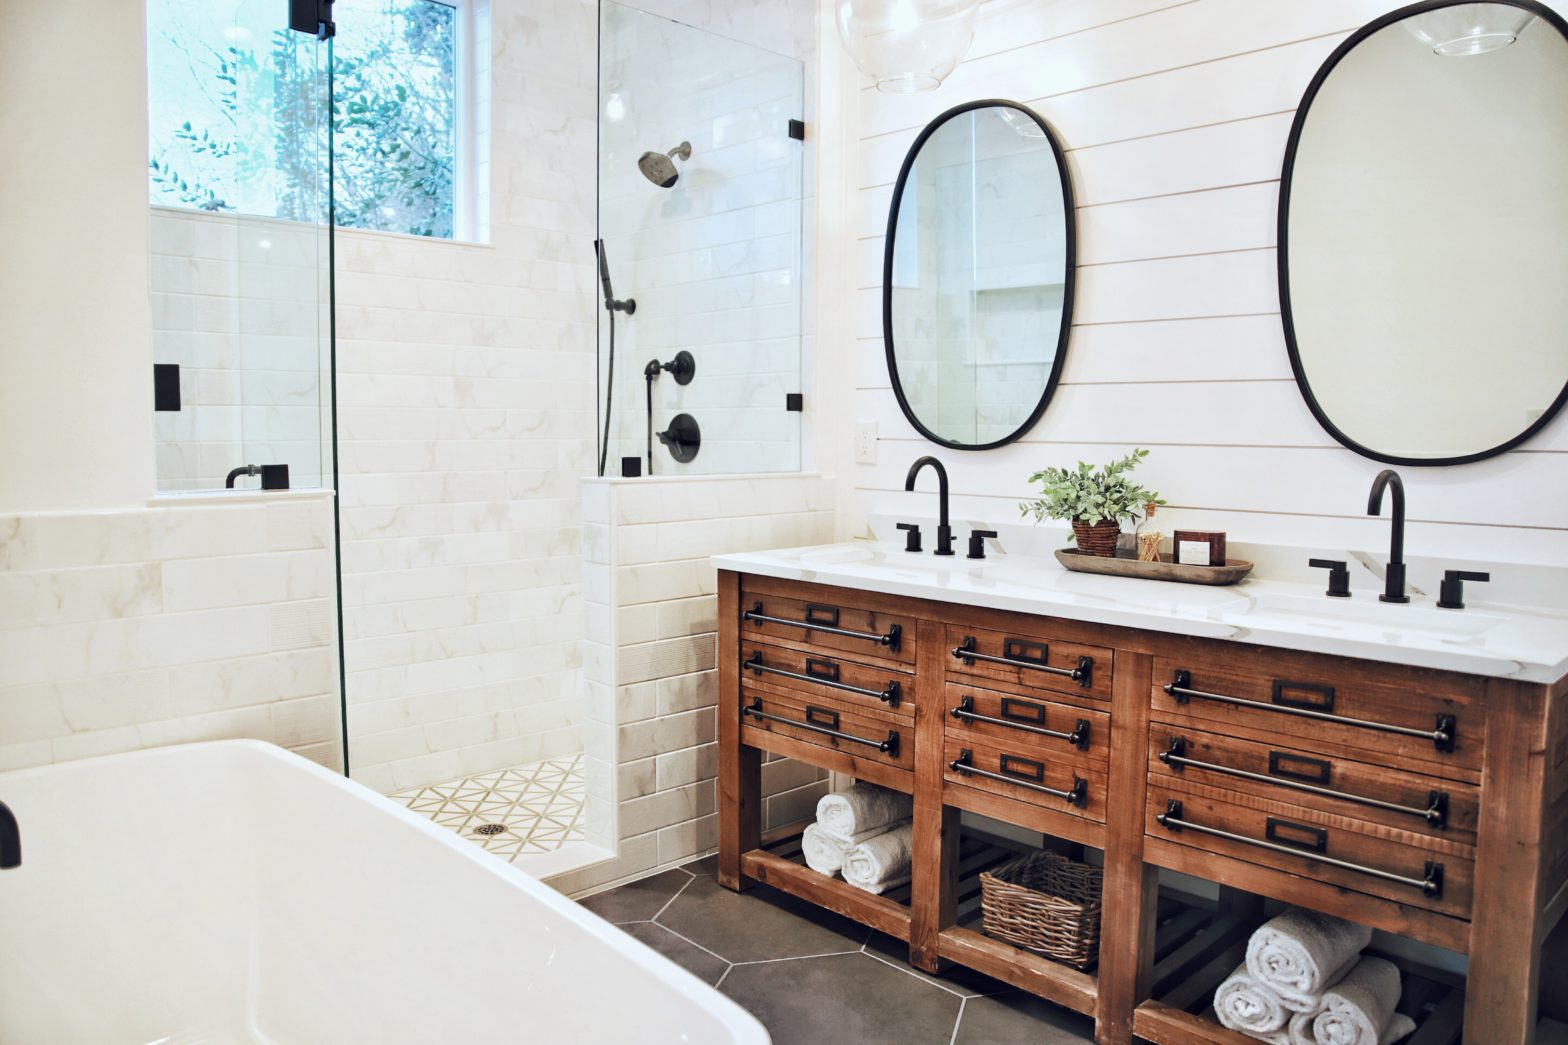 When you're ready to start your bathroom renovation project, we'll be ready to help!